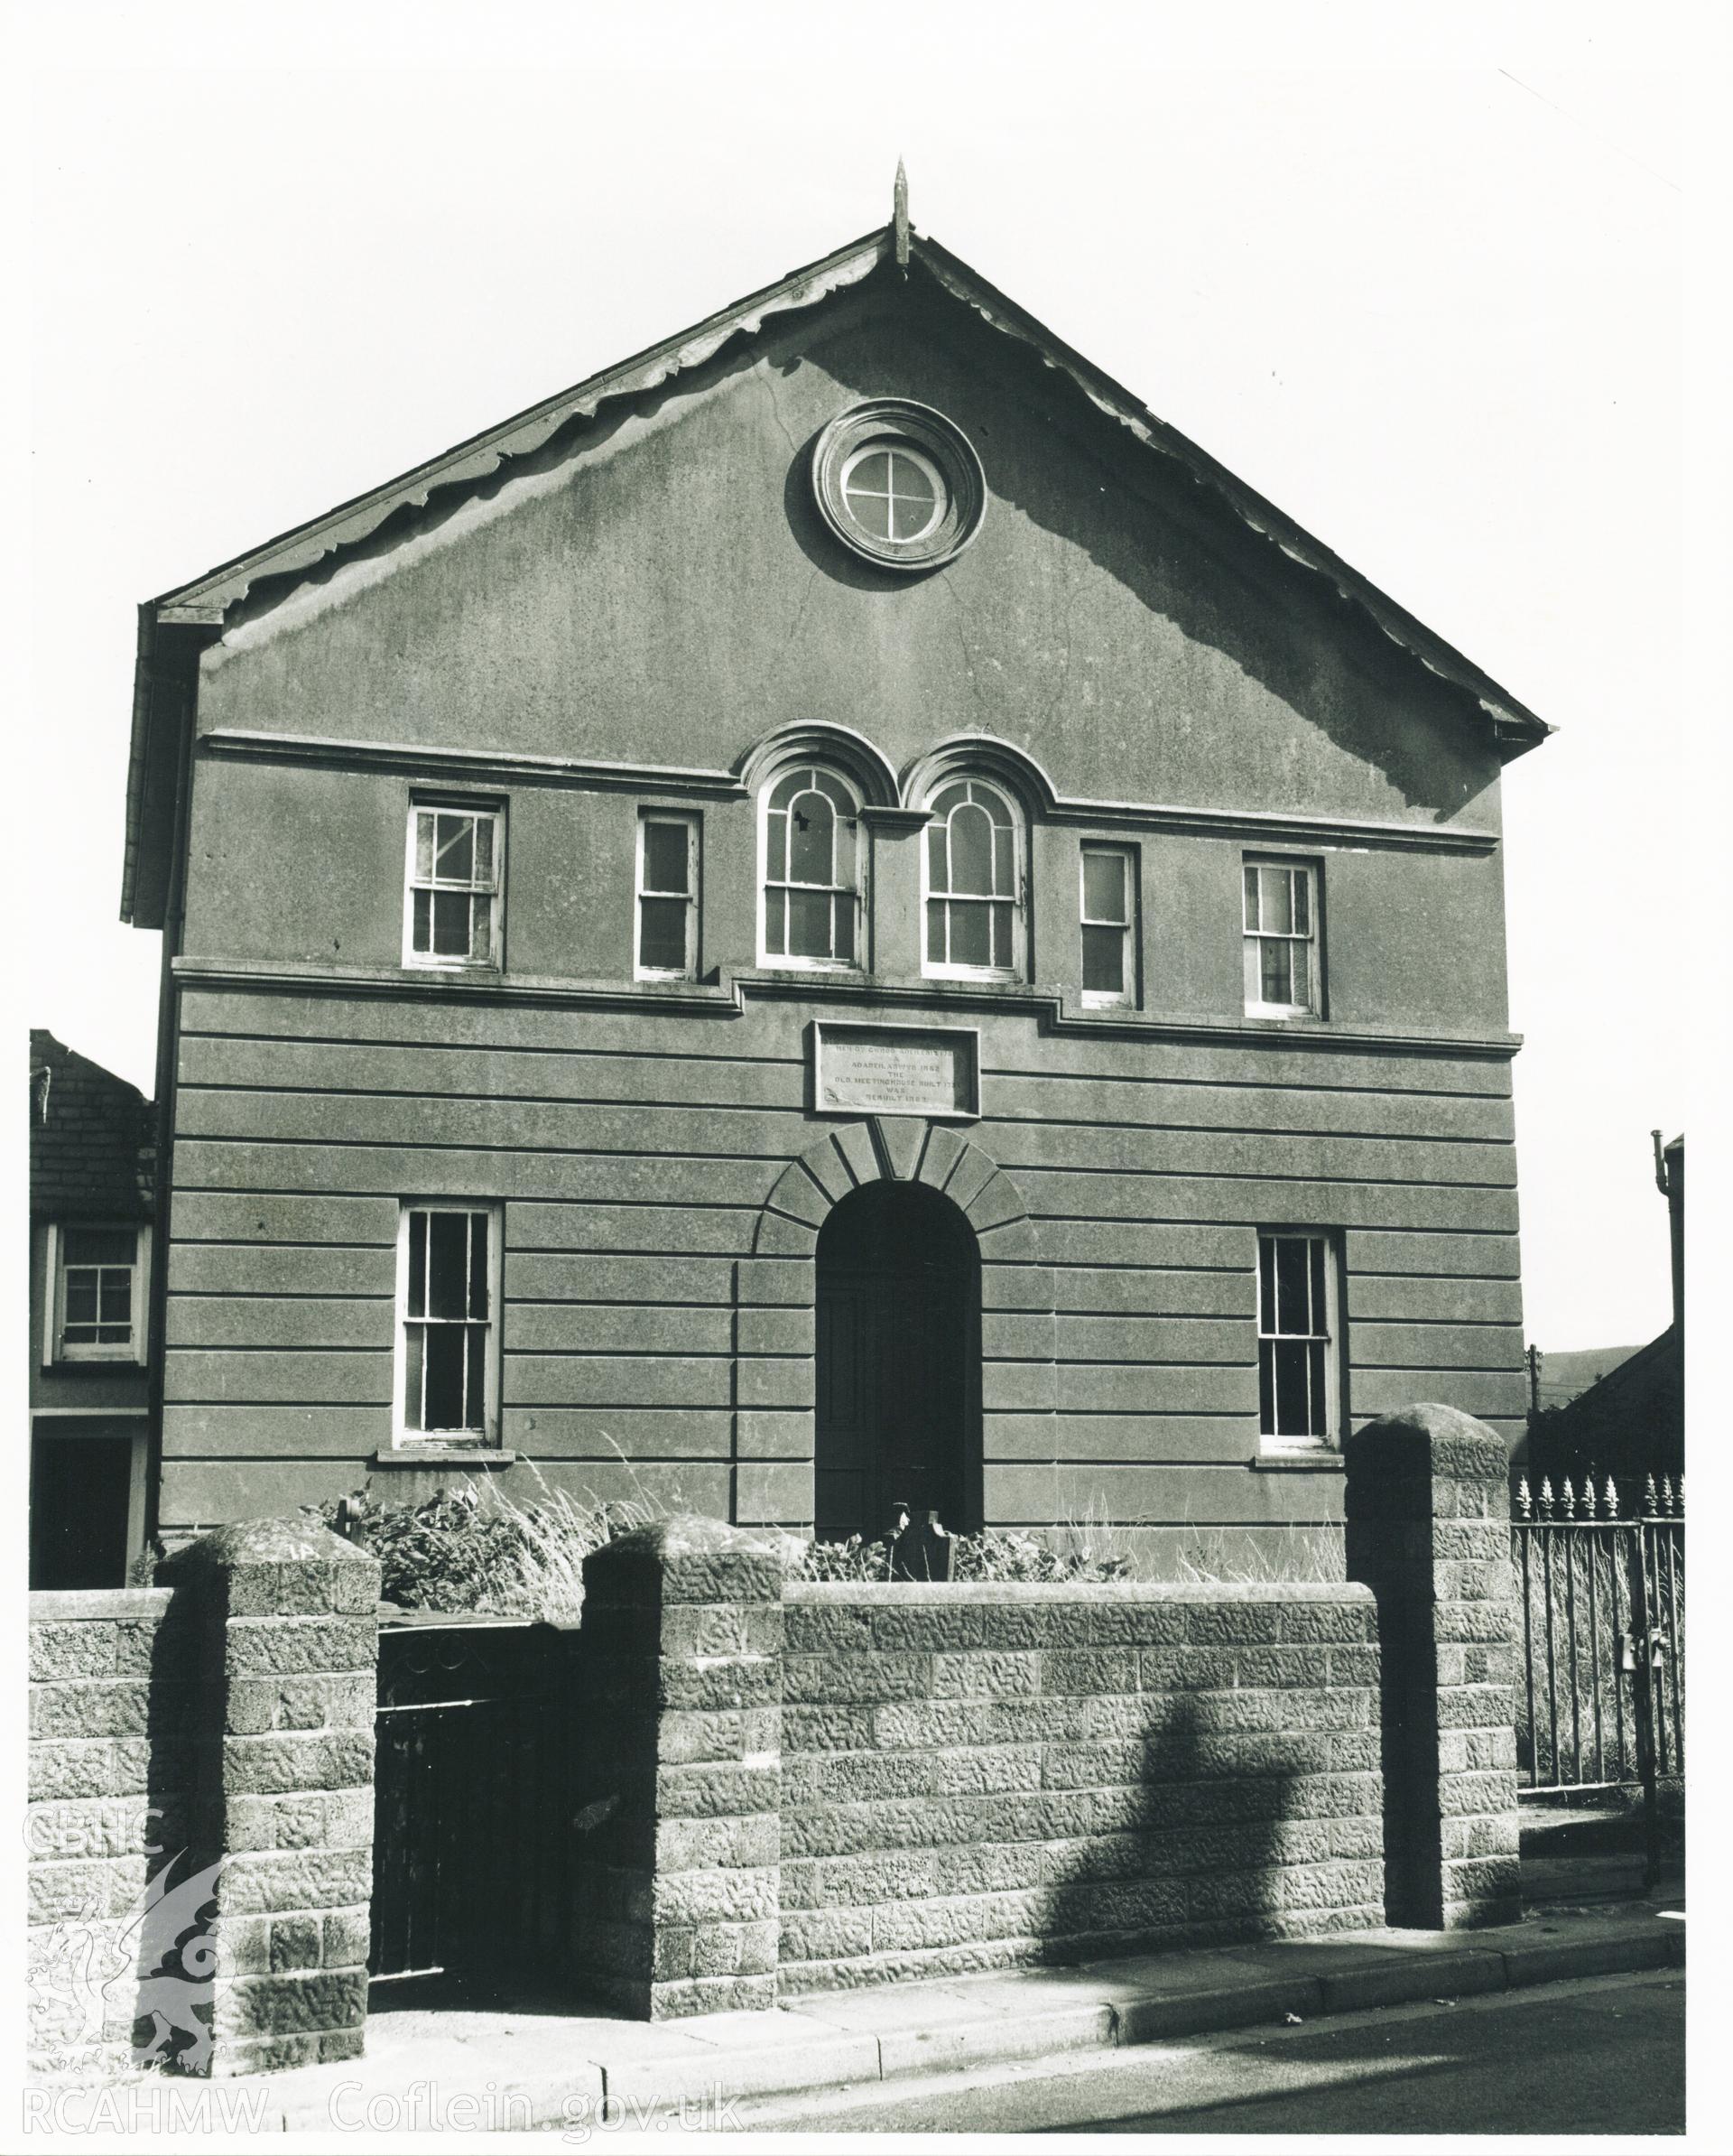 Undated black and white photograph of Yr Hen Dy Cwrdd's front facade. Donated to the RCAHMW during the Digital Dissent Project.